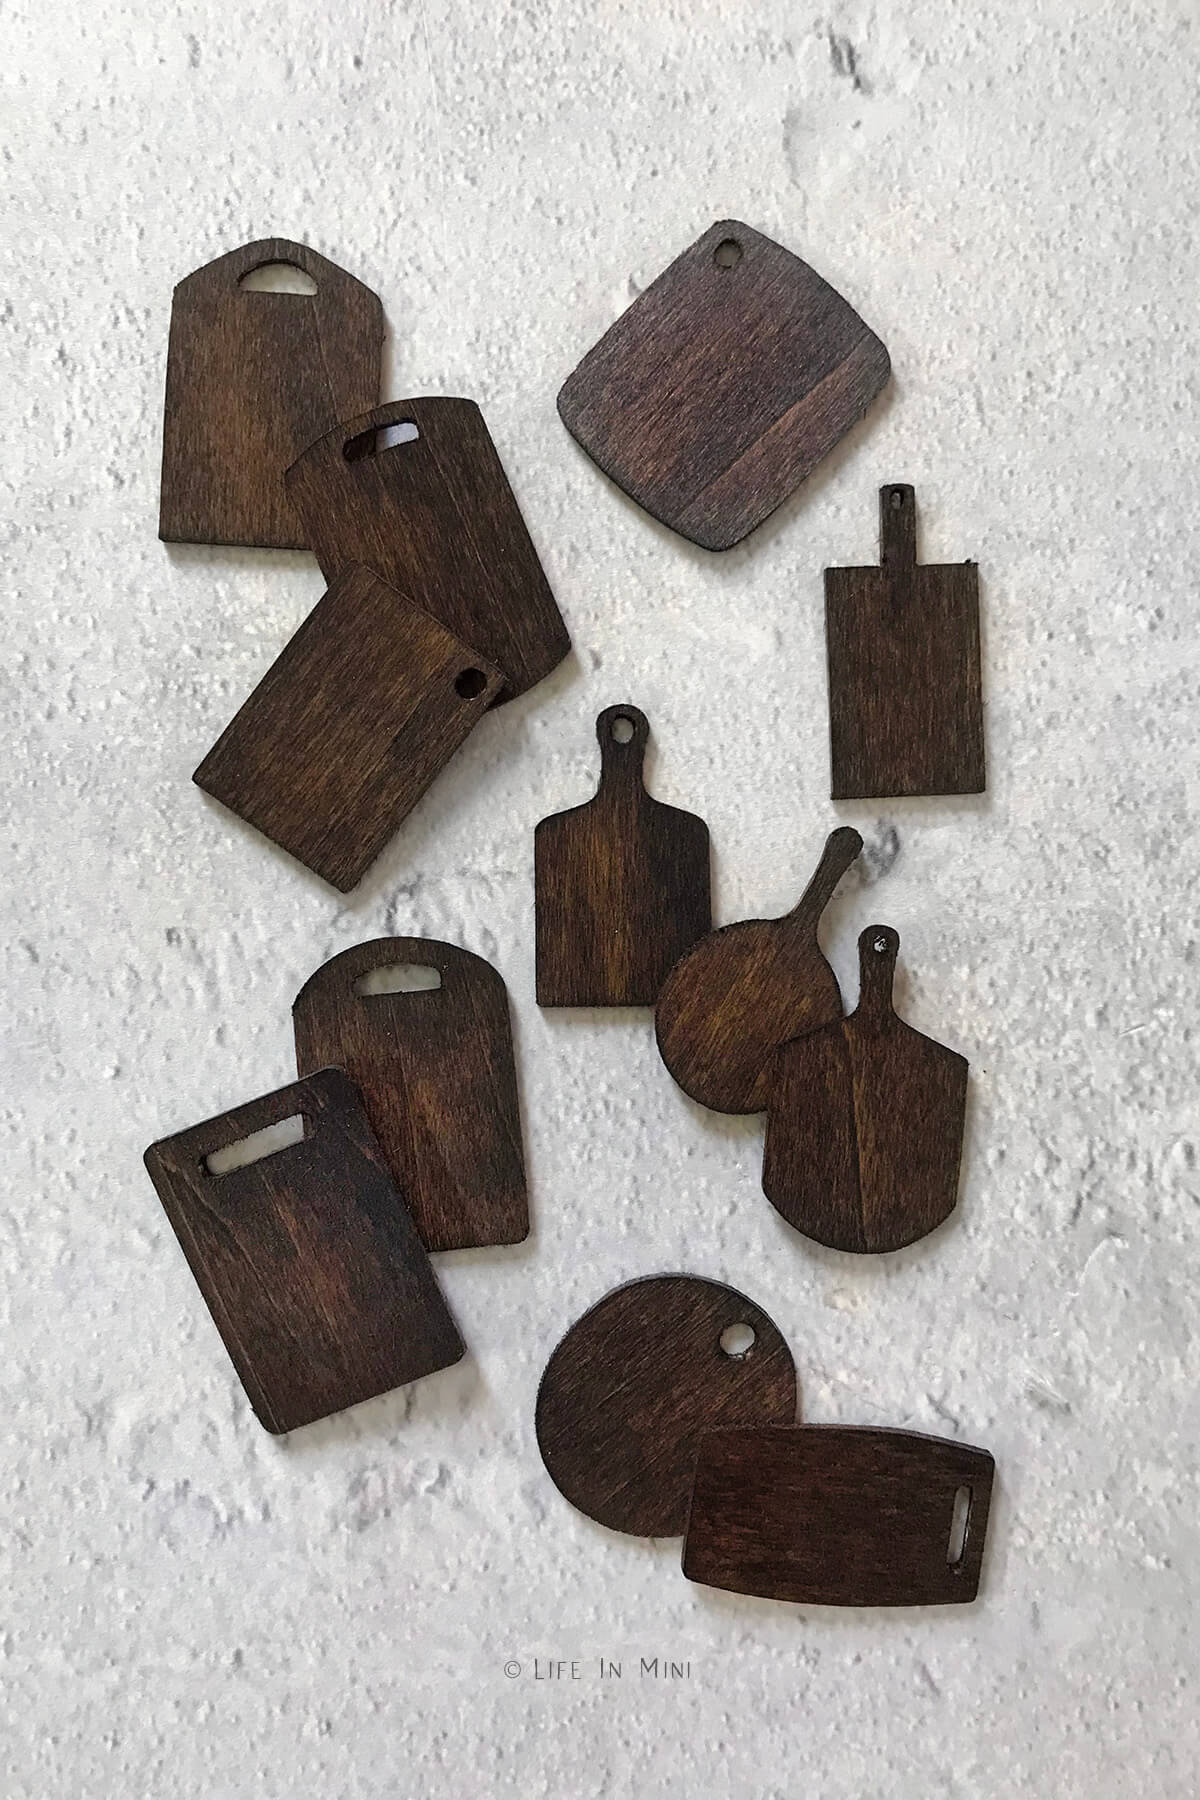 Miniature wood cutting boards of various shapes and sizes stained dark brown